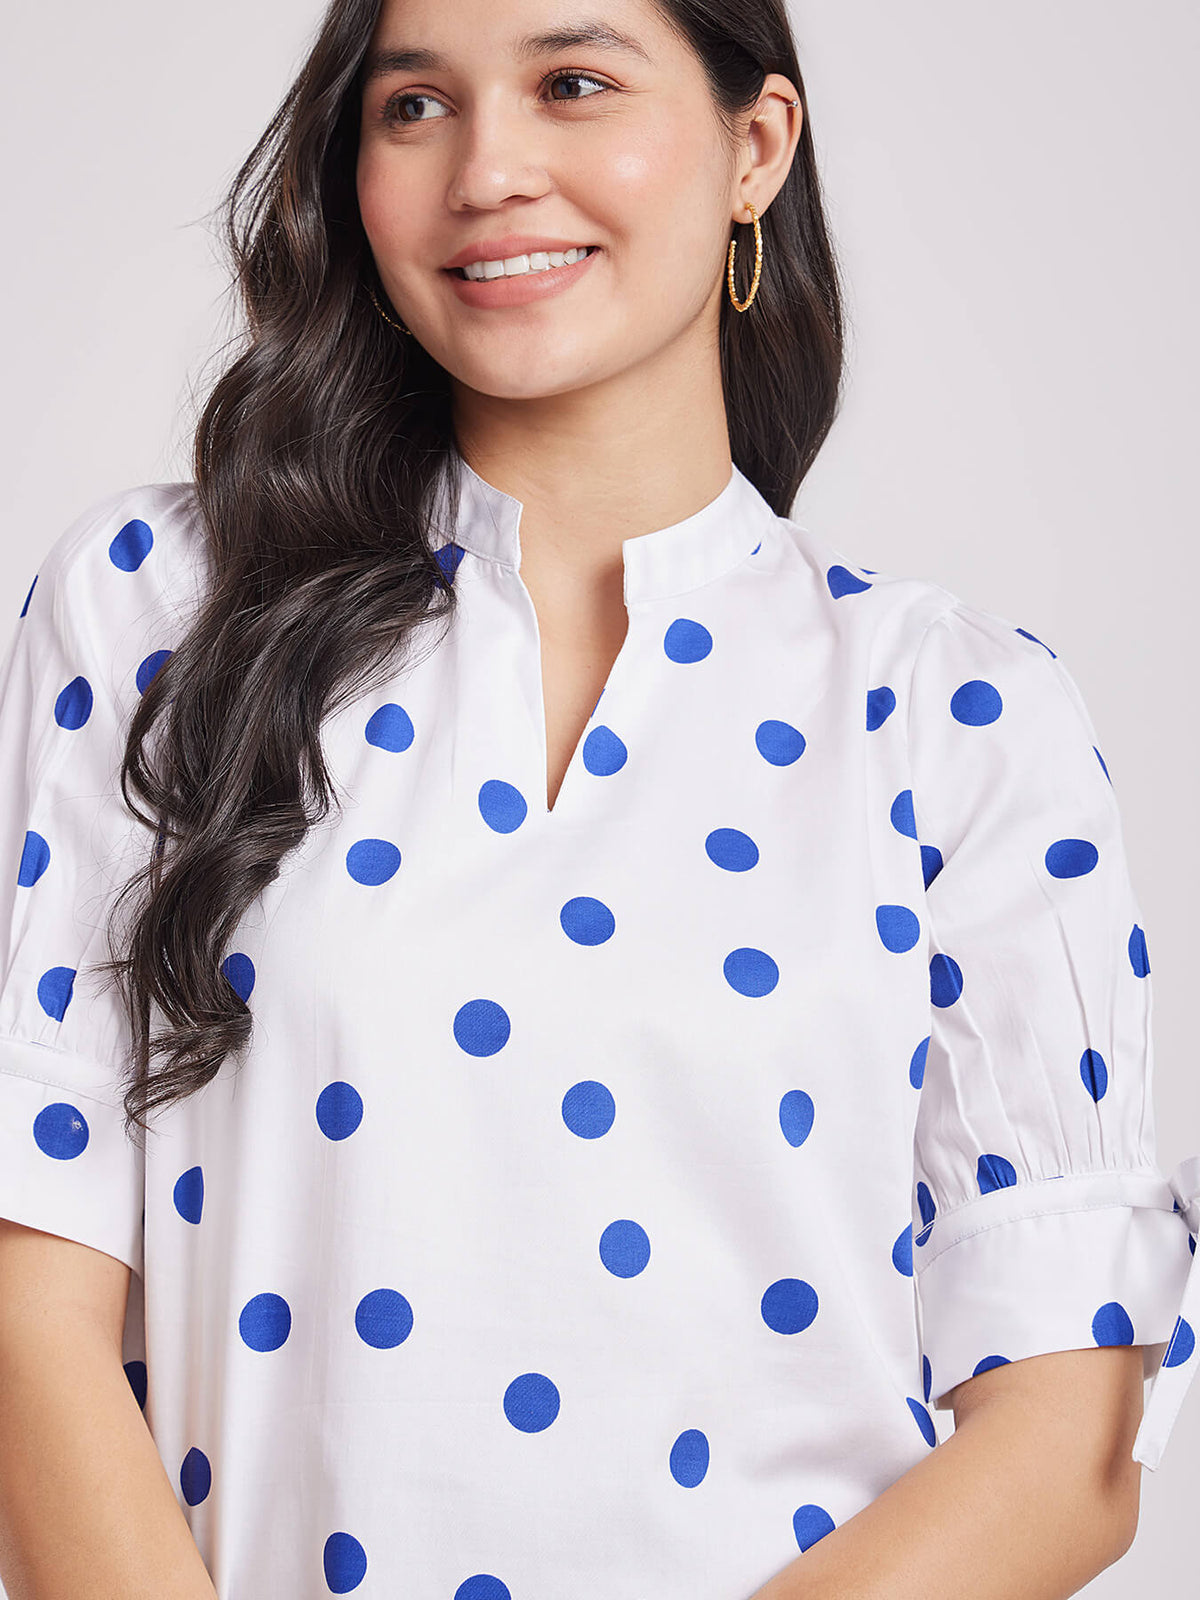 Cotton Polka Dot Top - White And Blue